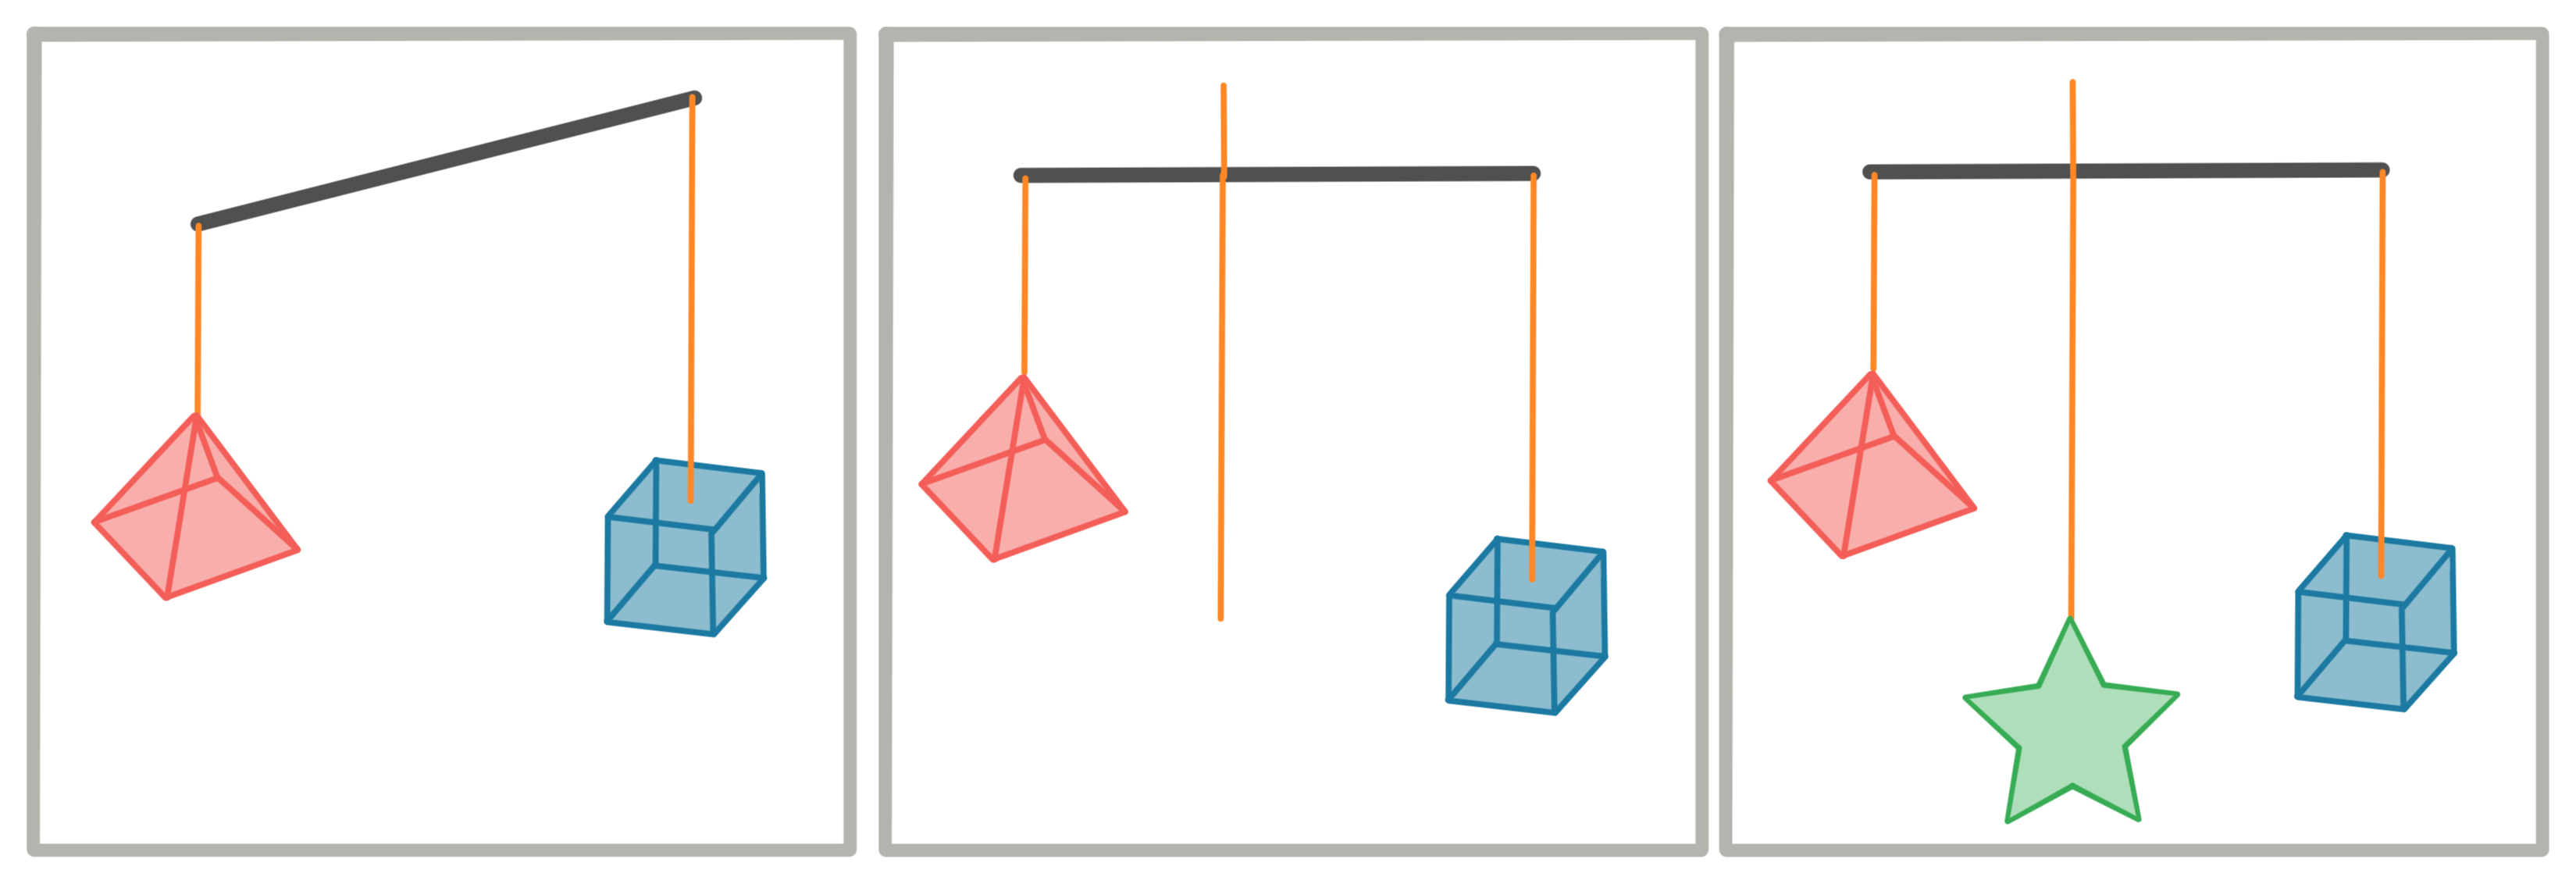 Illustration of steps to assemble a hanging mobile